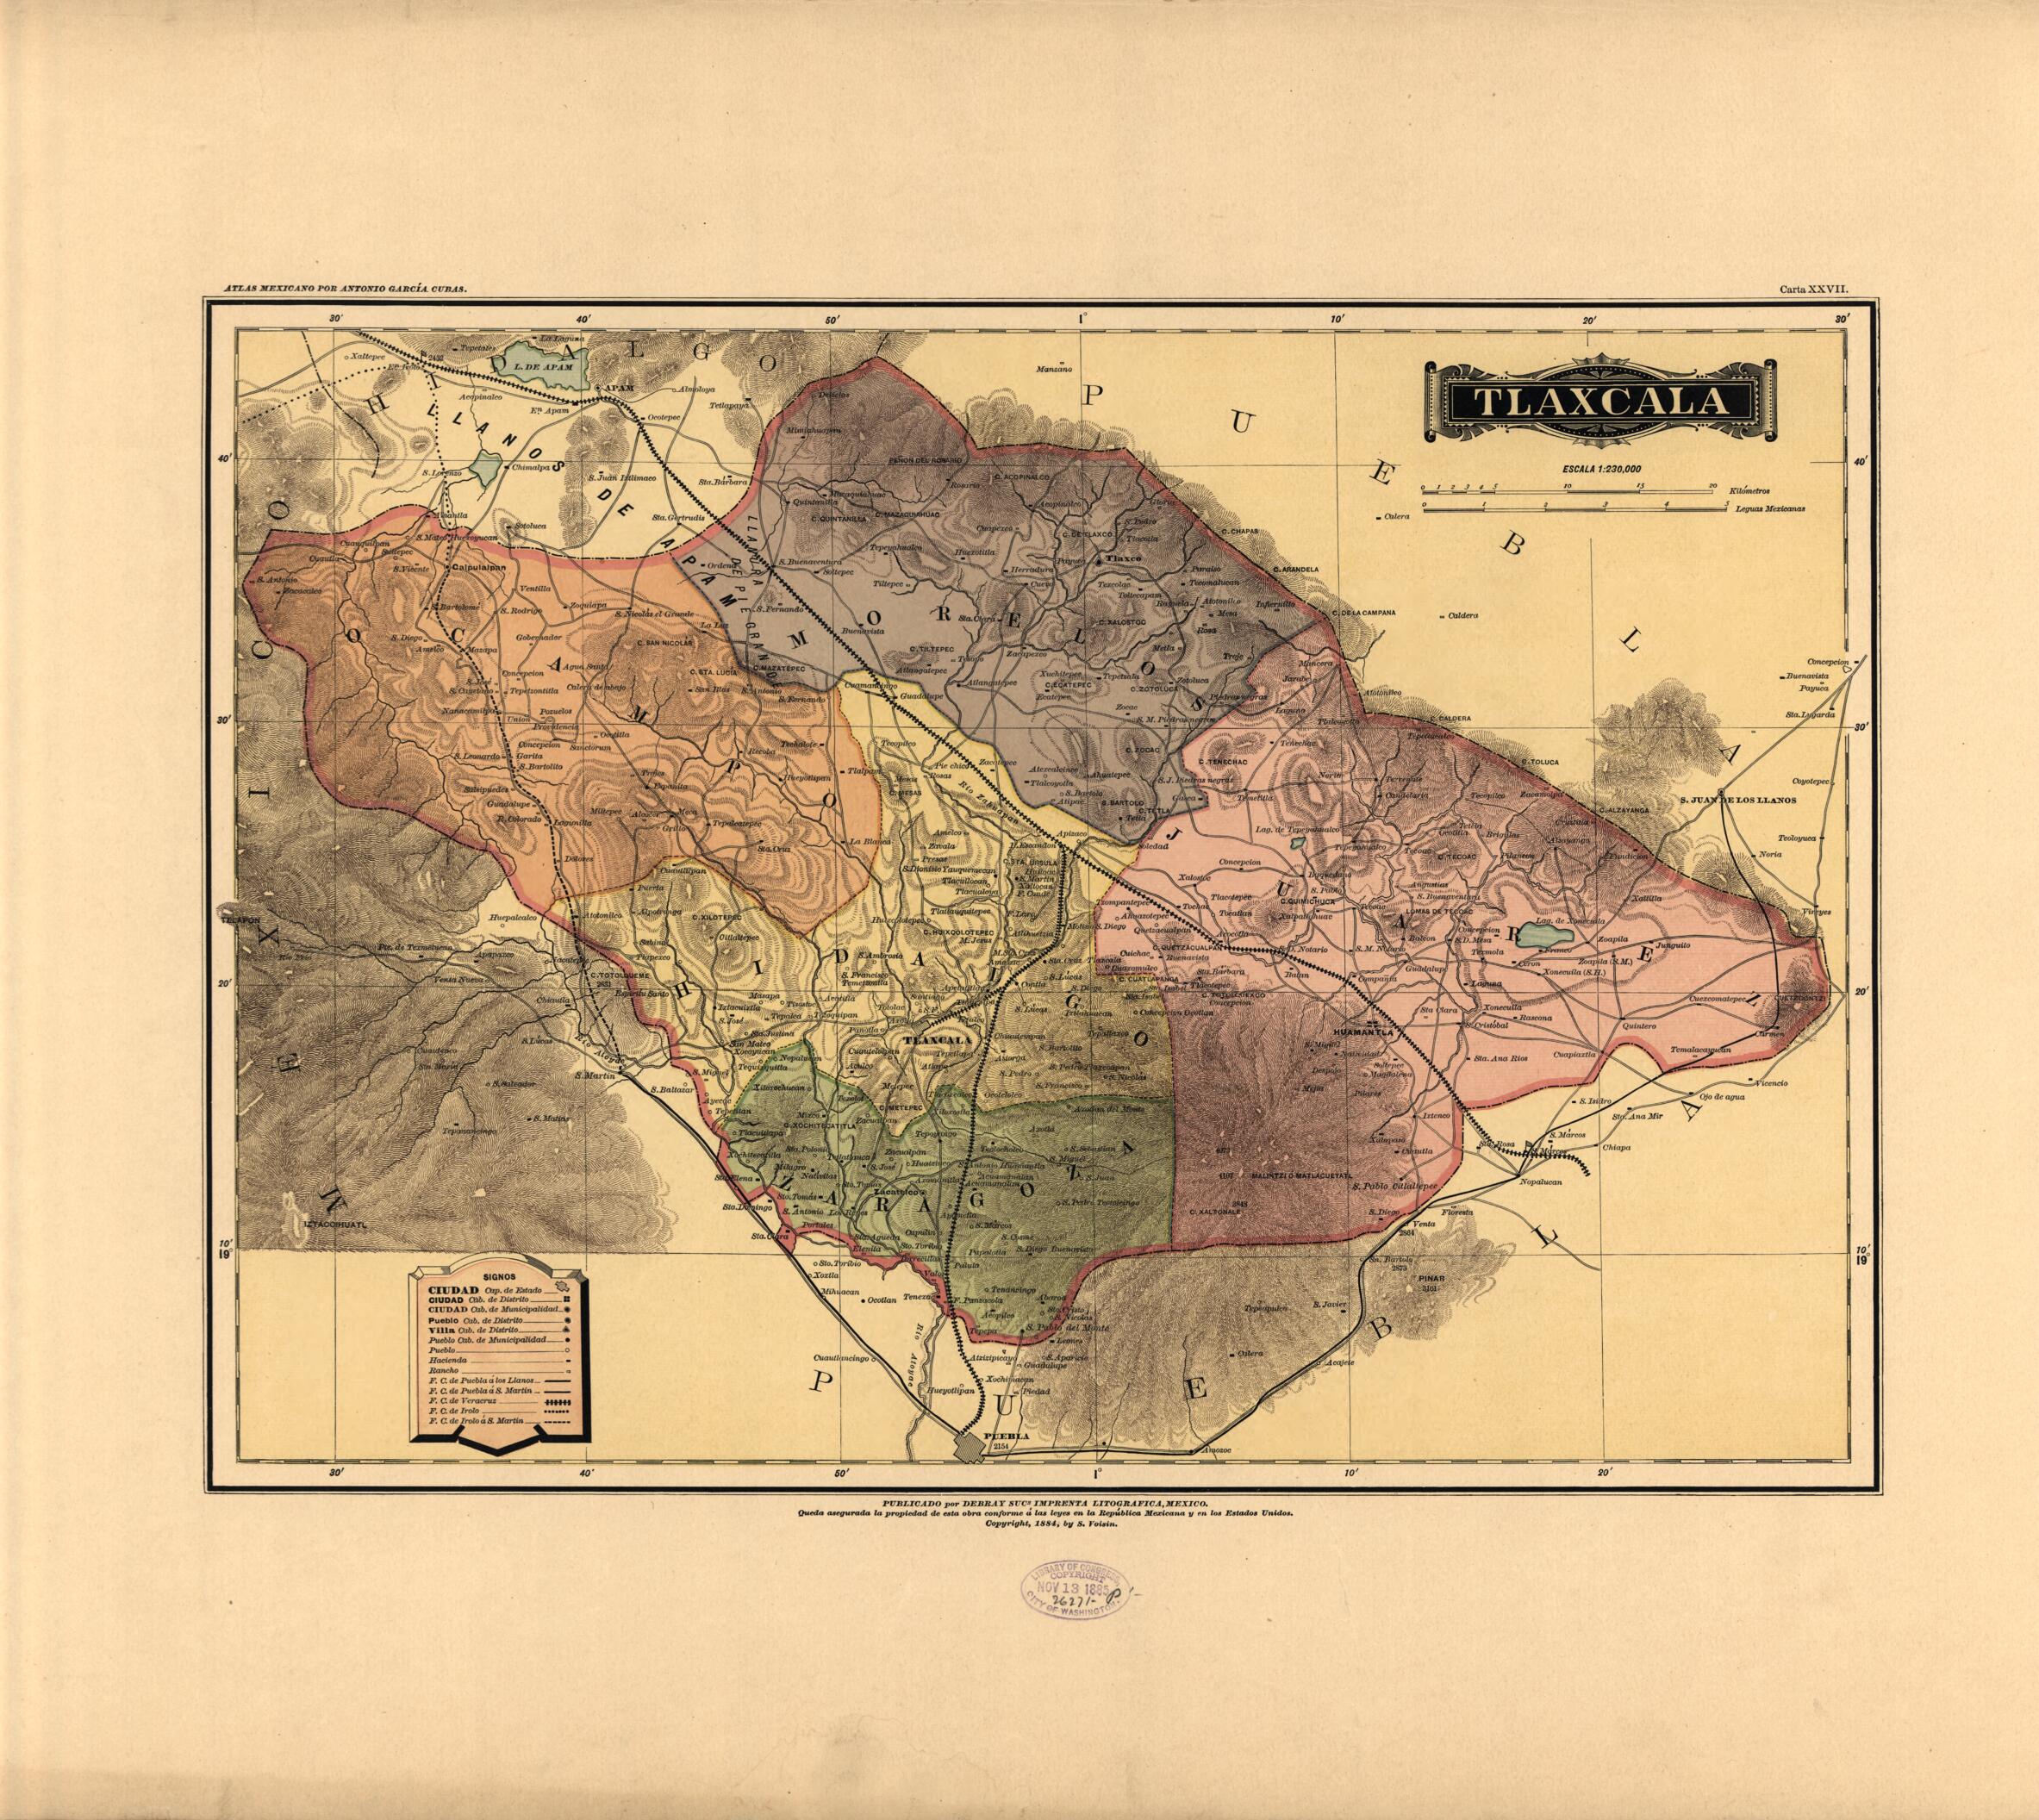 This old map of Tlaxcala from Atlas Mexicano. from 1884 was created by Antonio García Cubas in 1884